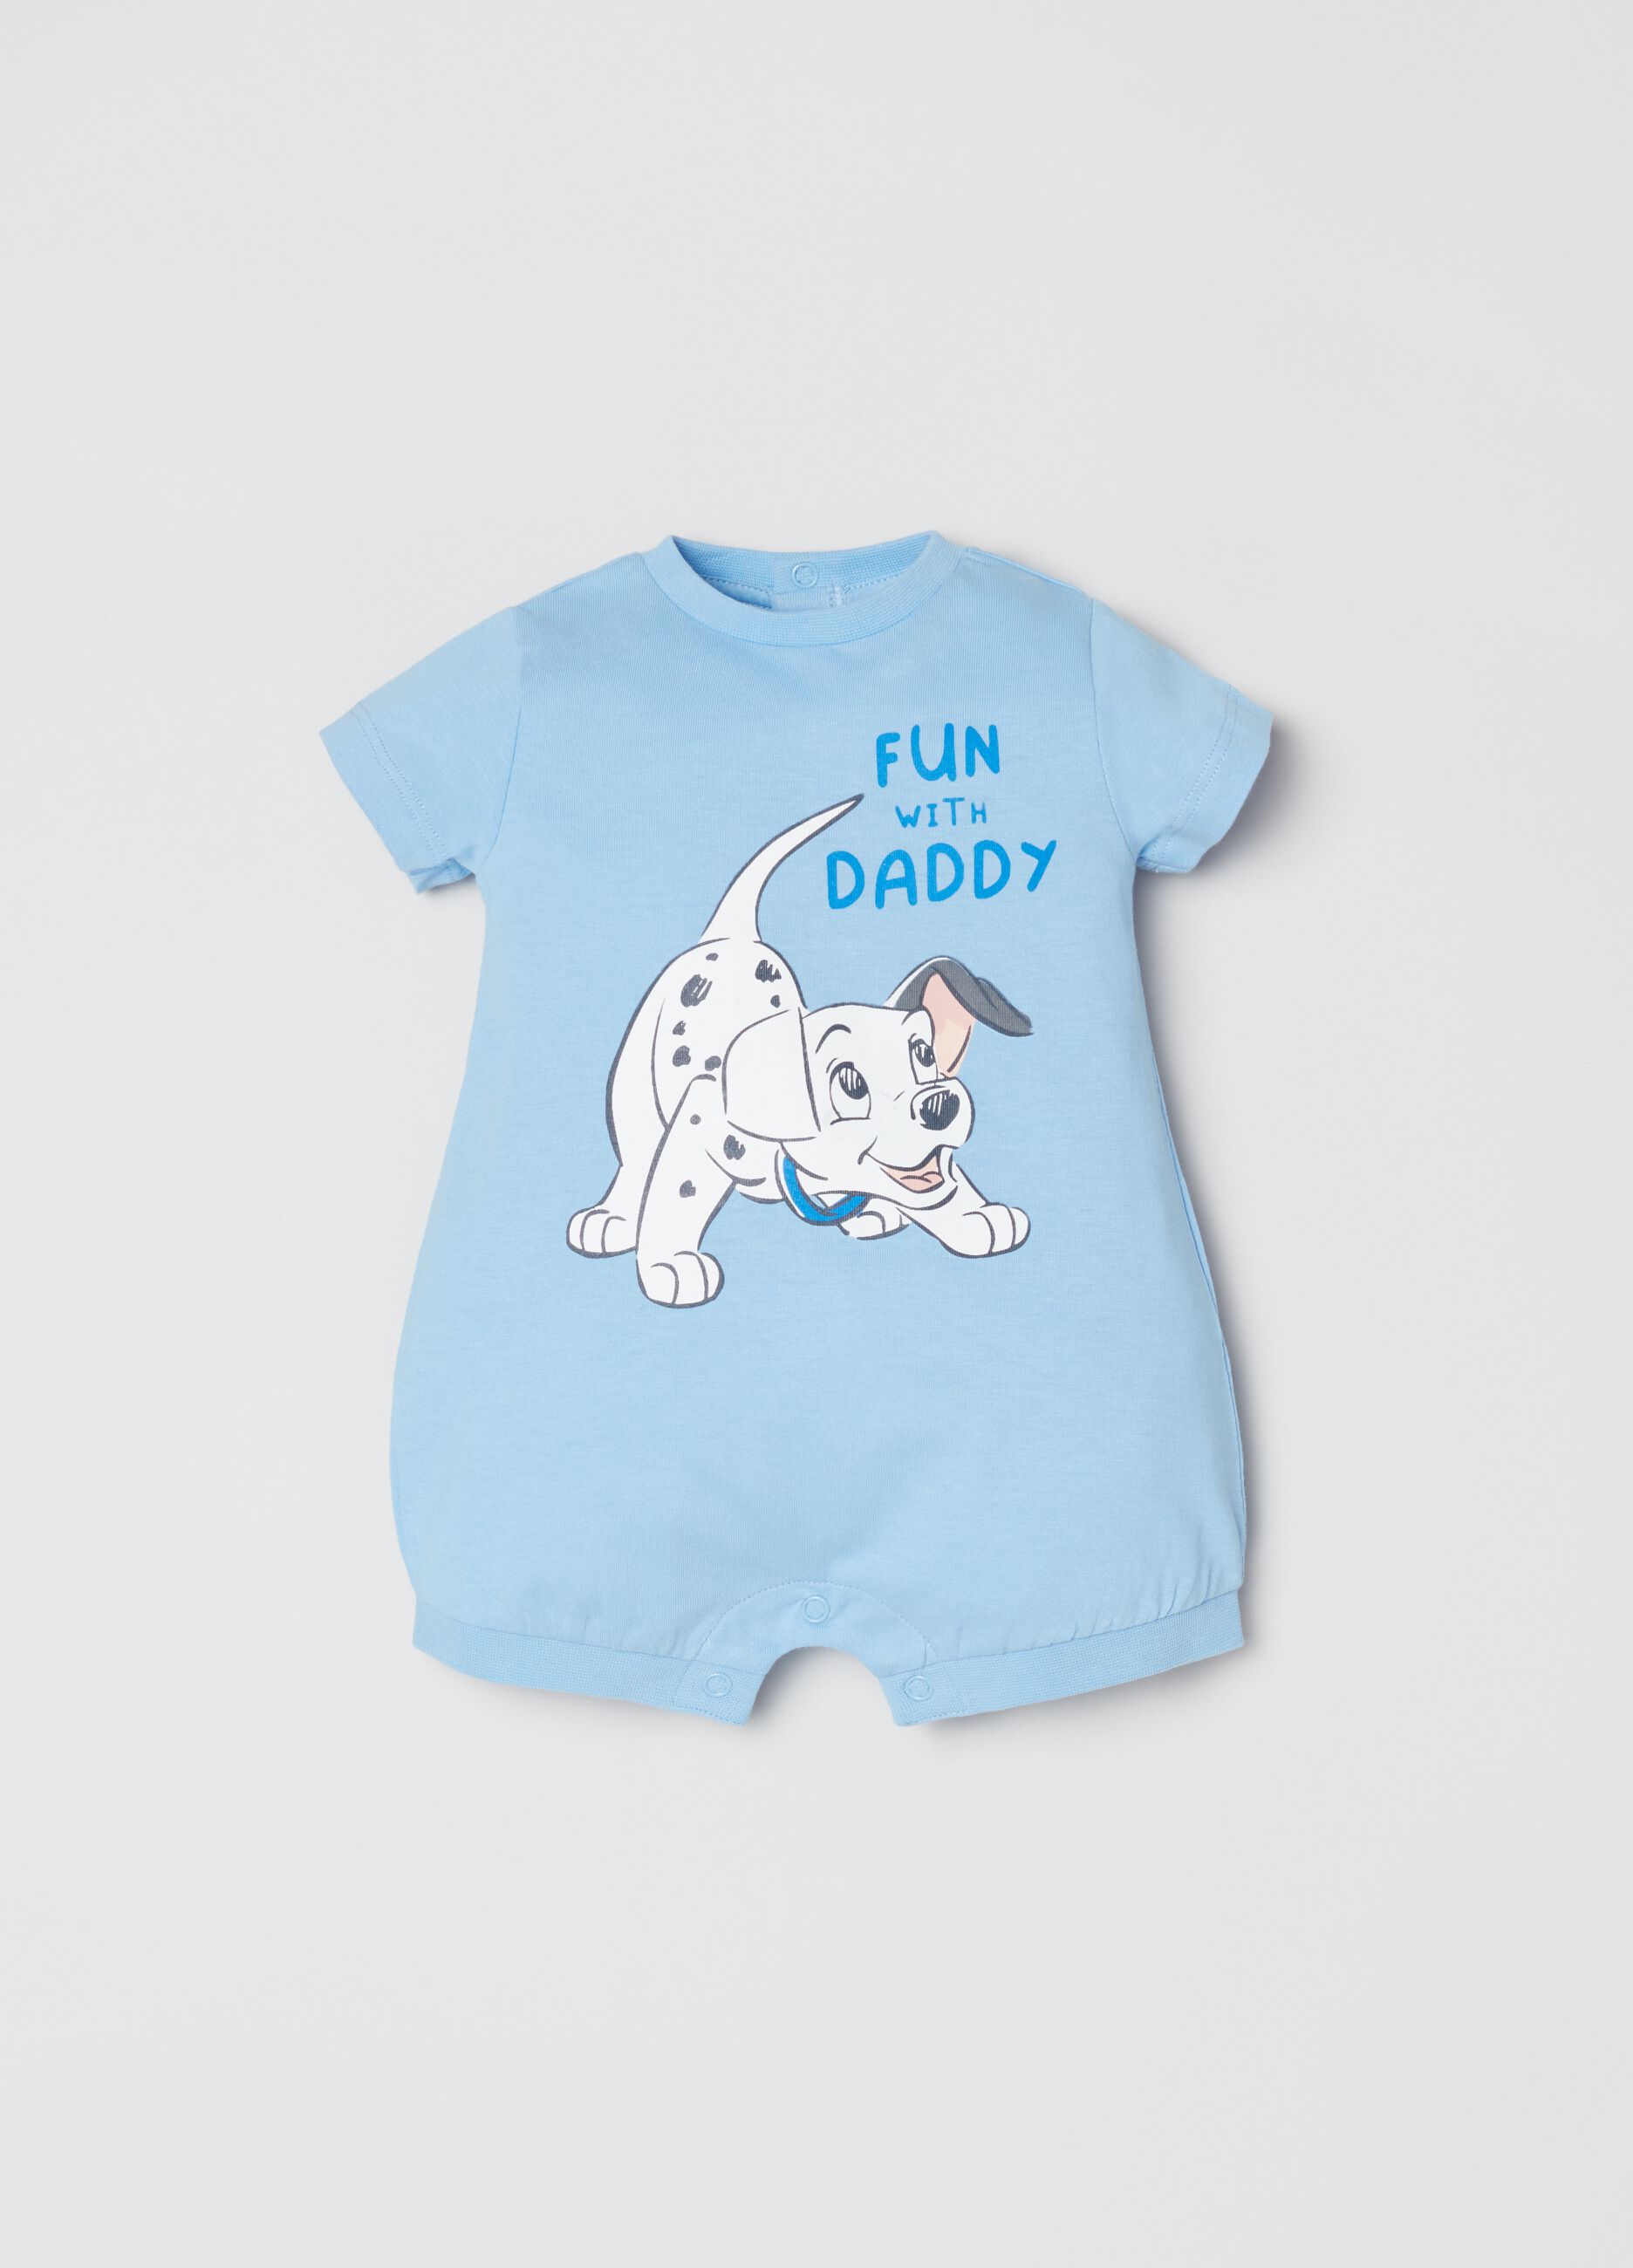 Romper suit with One Hundred and One Dalmatians print